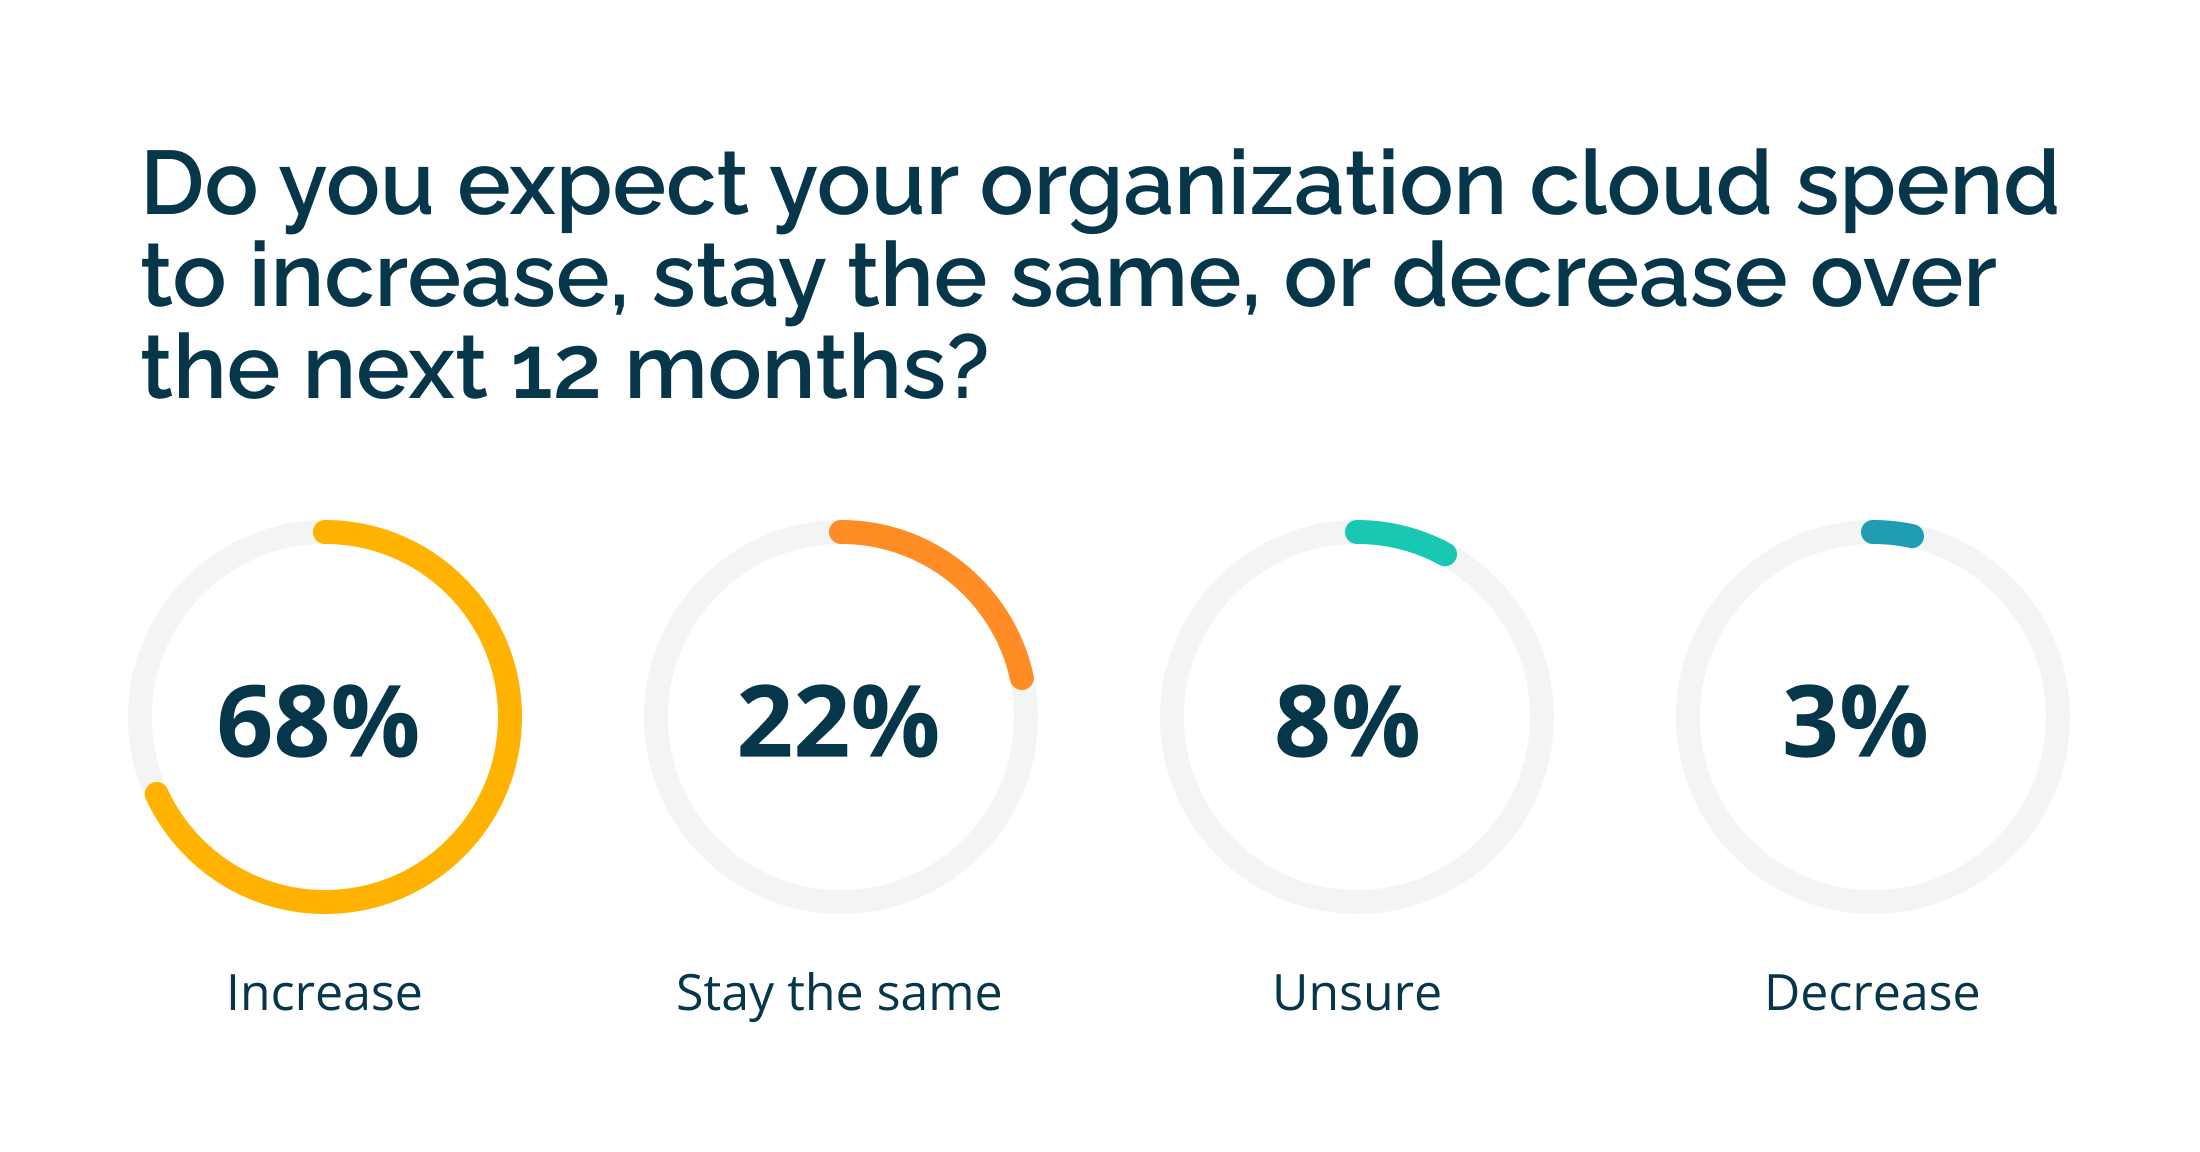 Do you expect your org cloud spend  to increase, stay the same, or decrease over the next 12 months